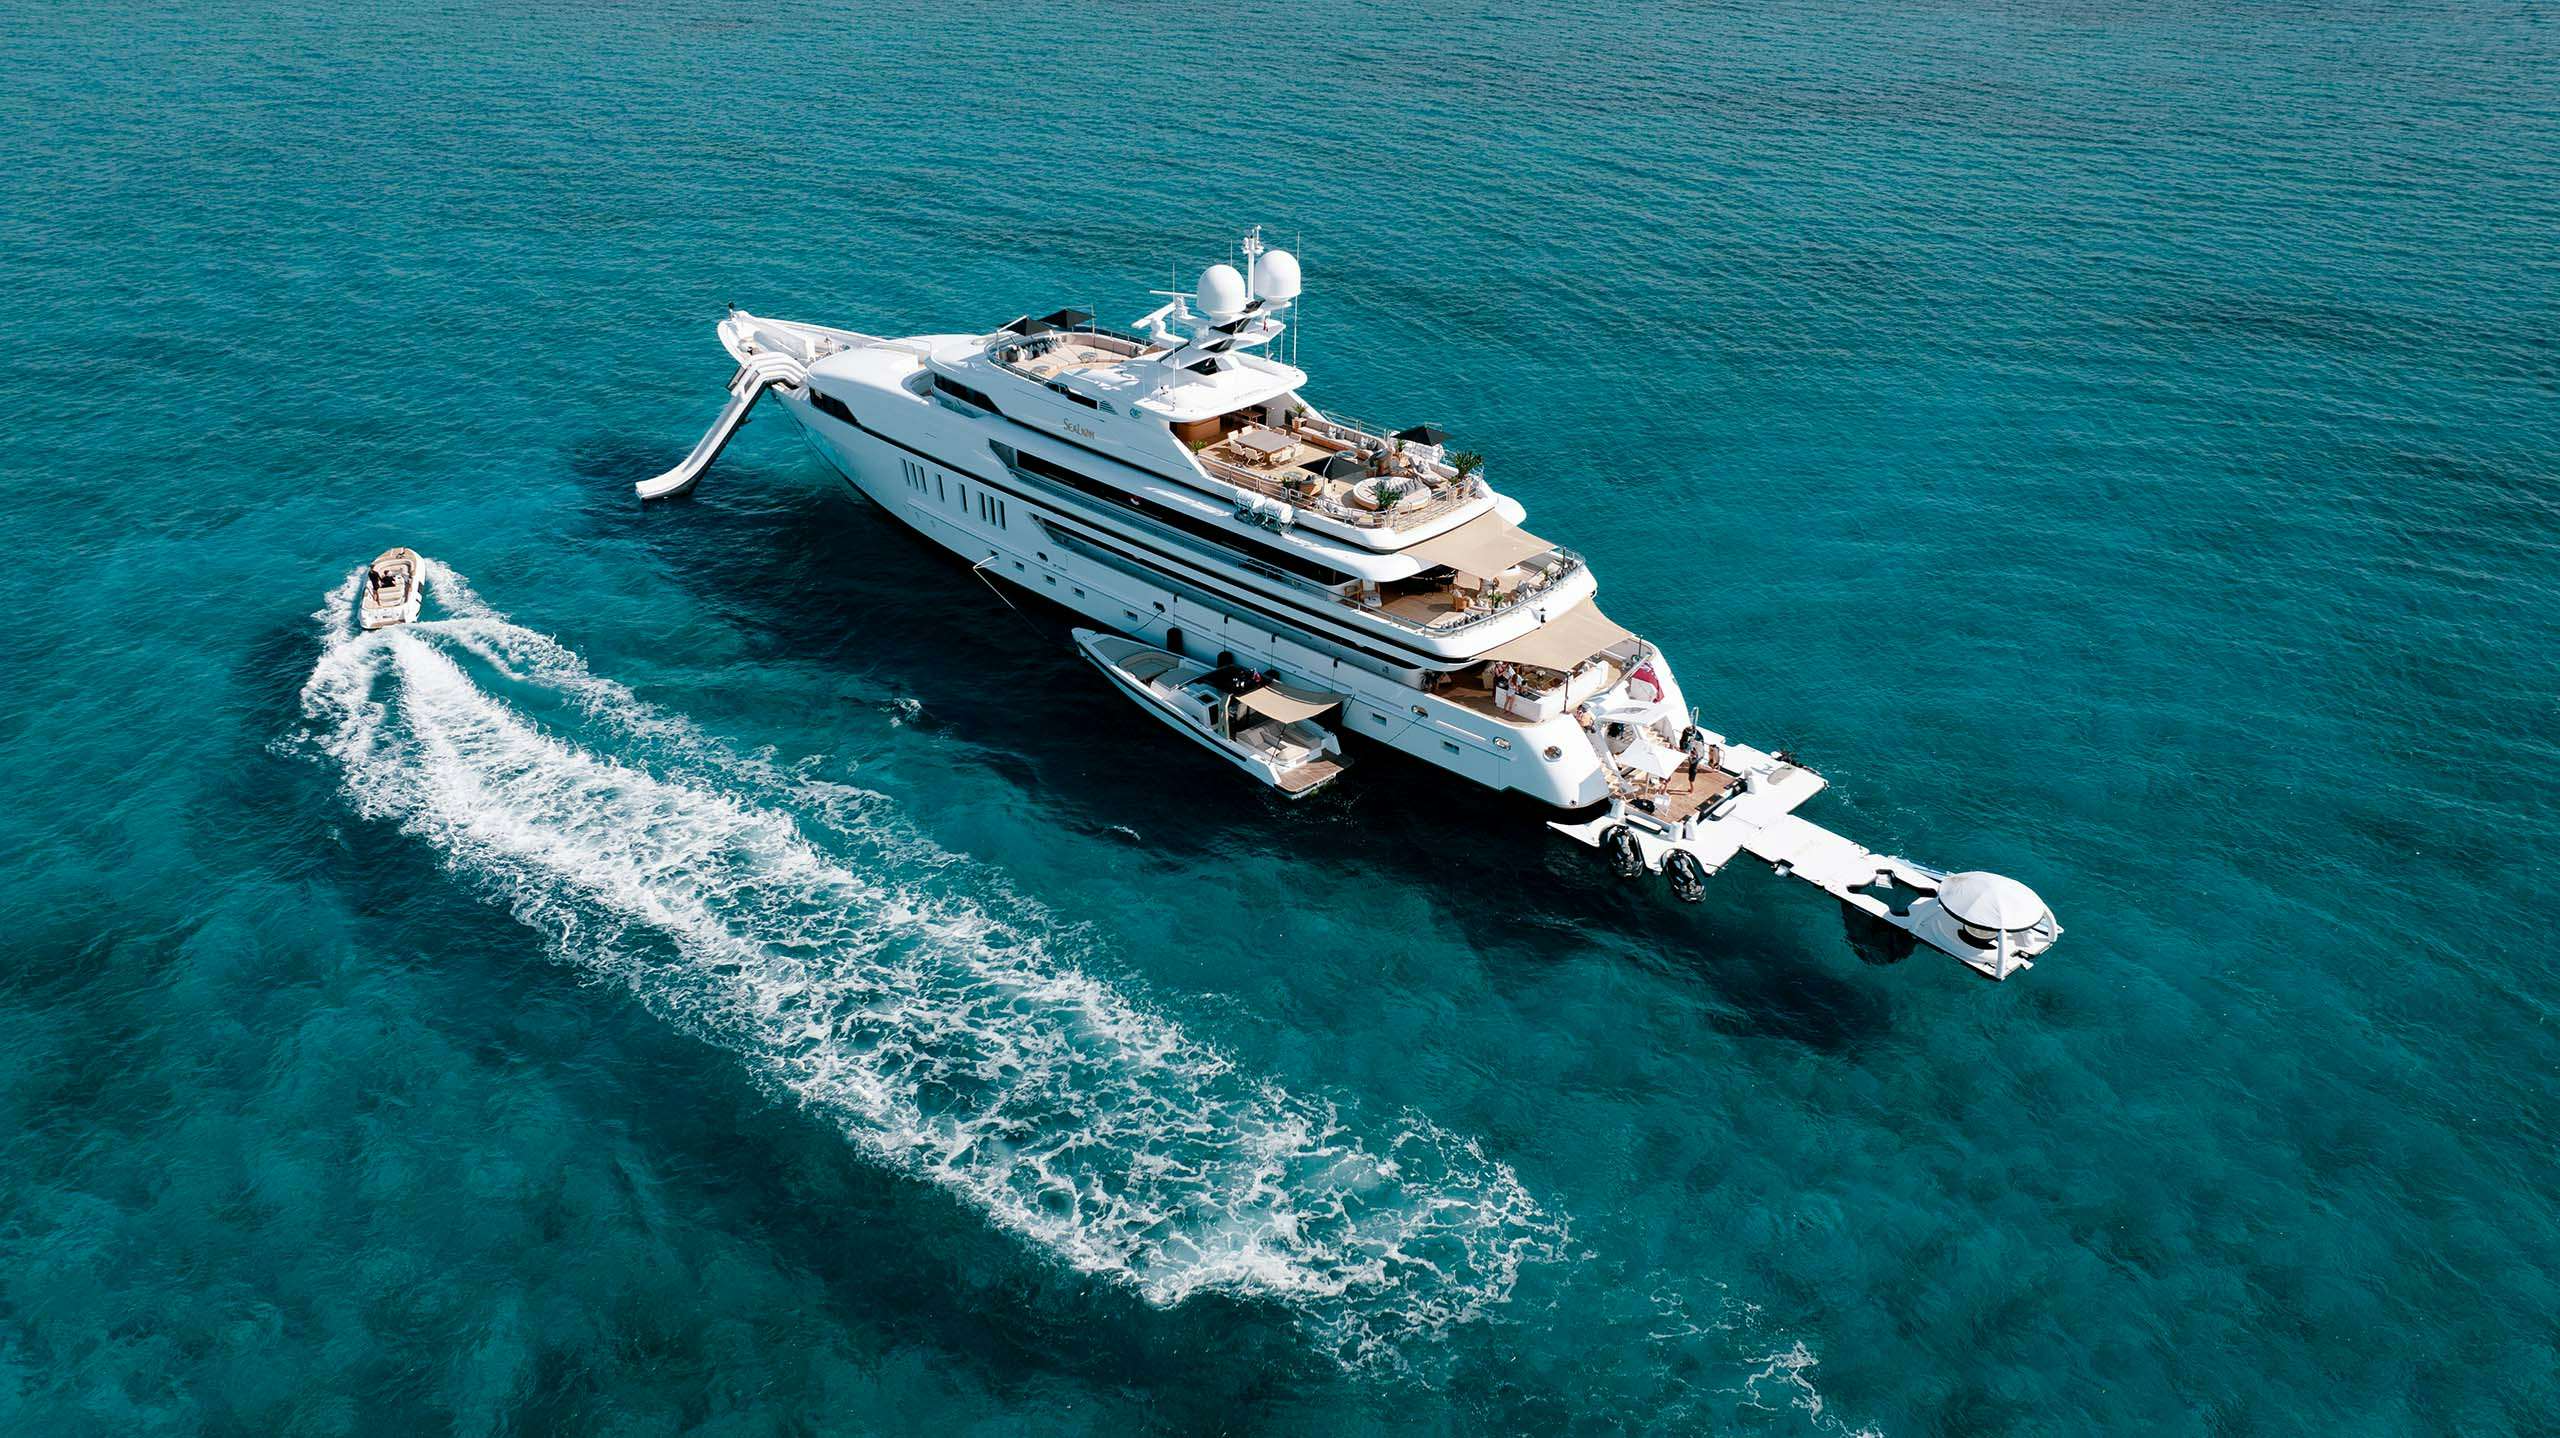 Superyacht anchored in the Bahamas with tender navigating around it